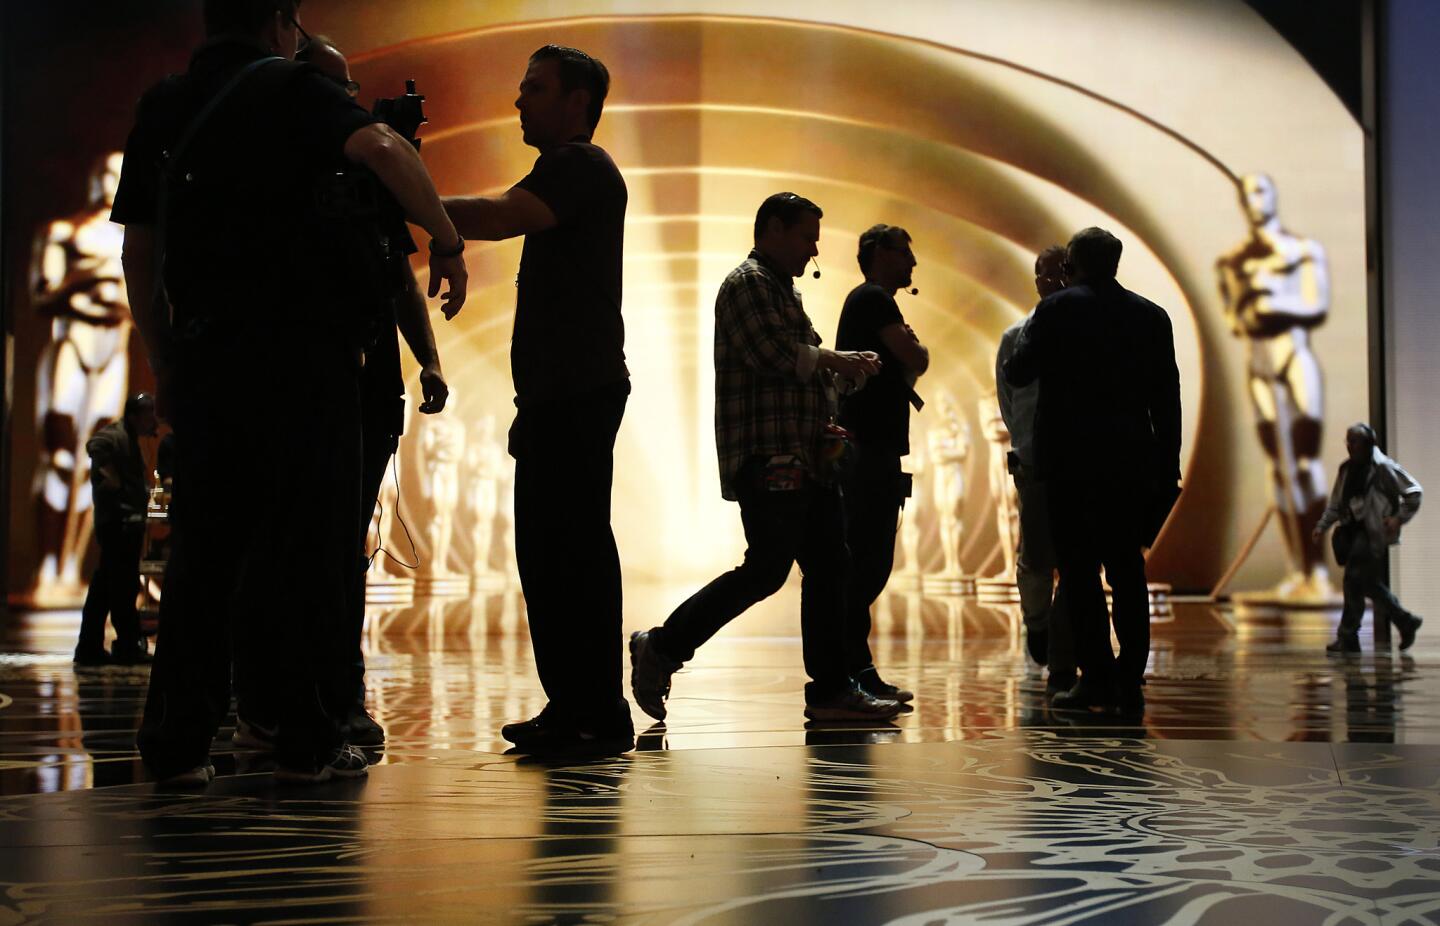 Stage managers and crew were in constant motion Saturday during rehearsals at the Dolby Theatre for Sunday's 88th annual Academy Awards.